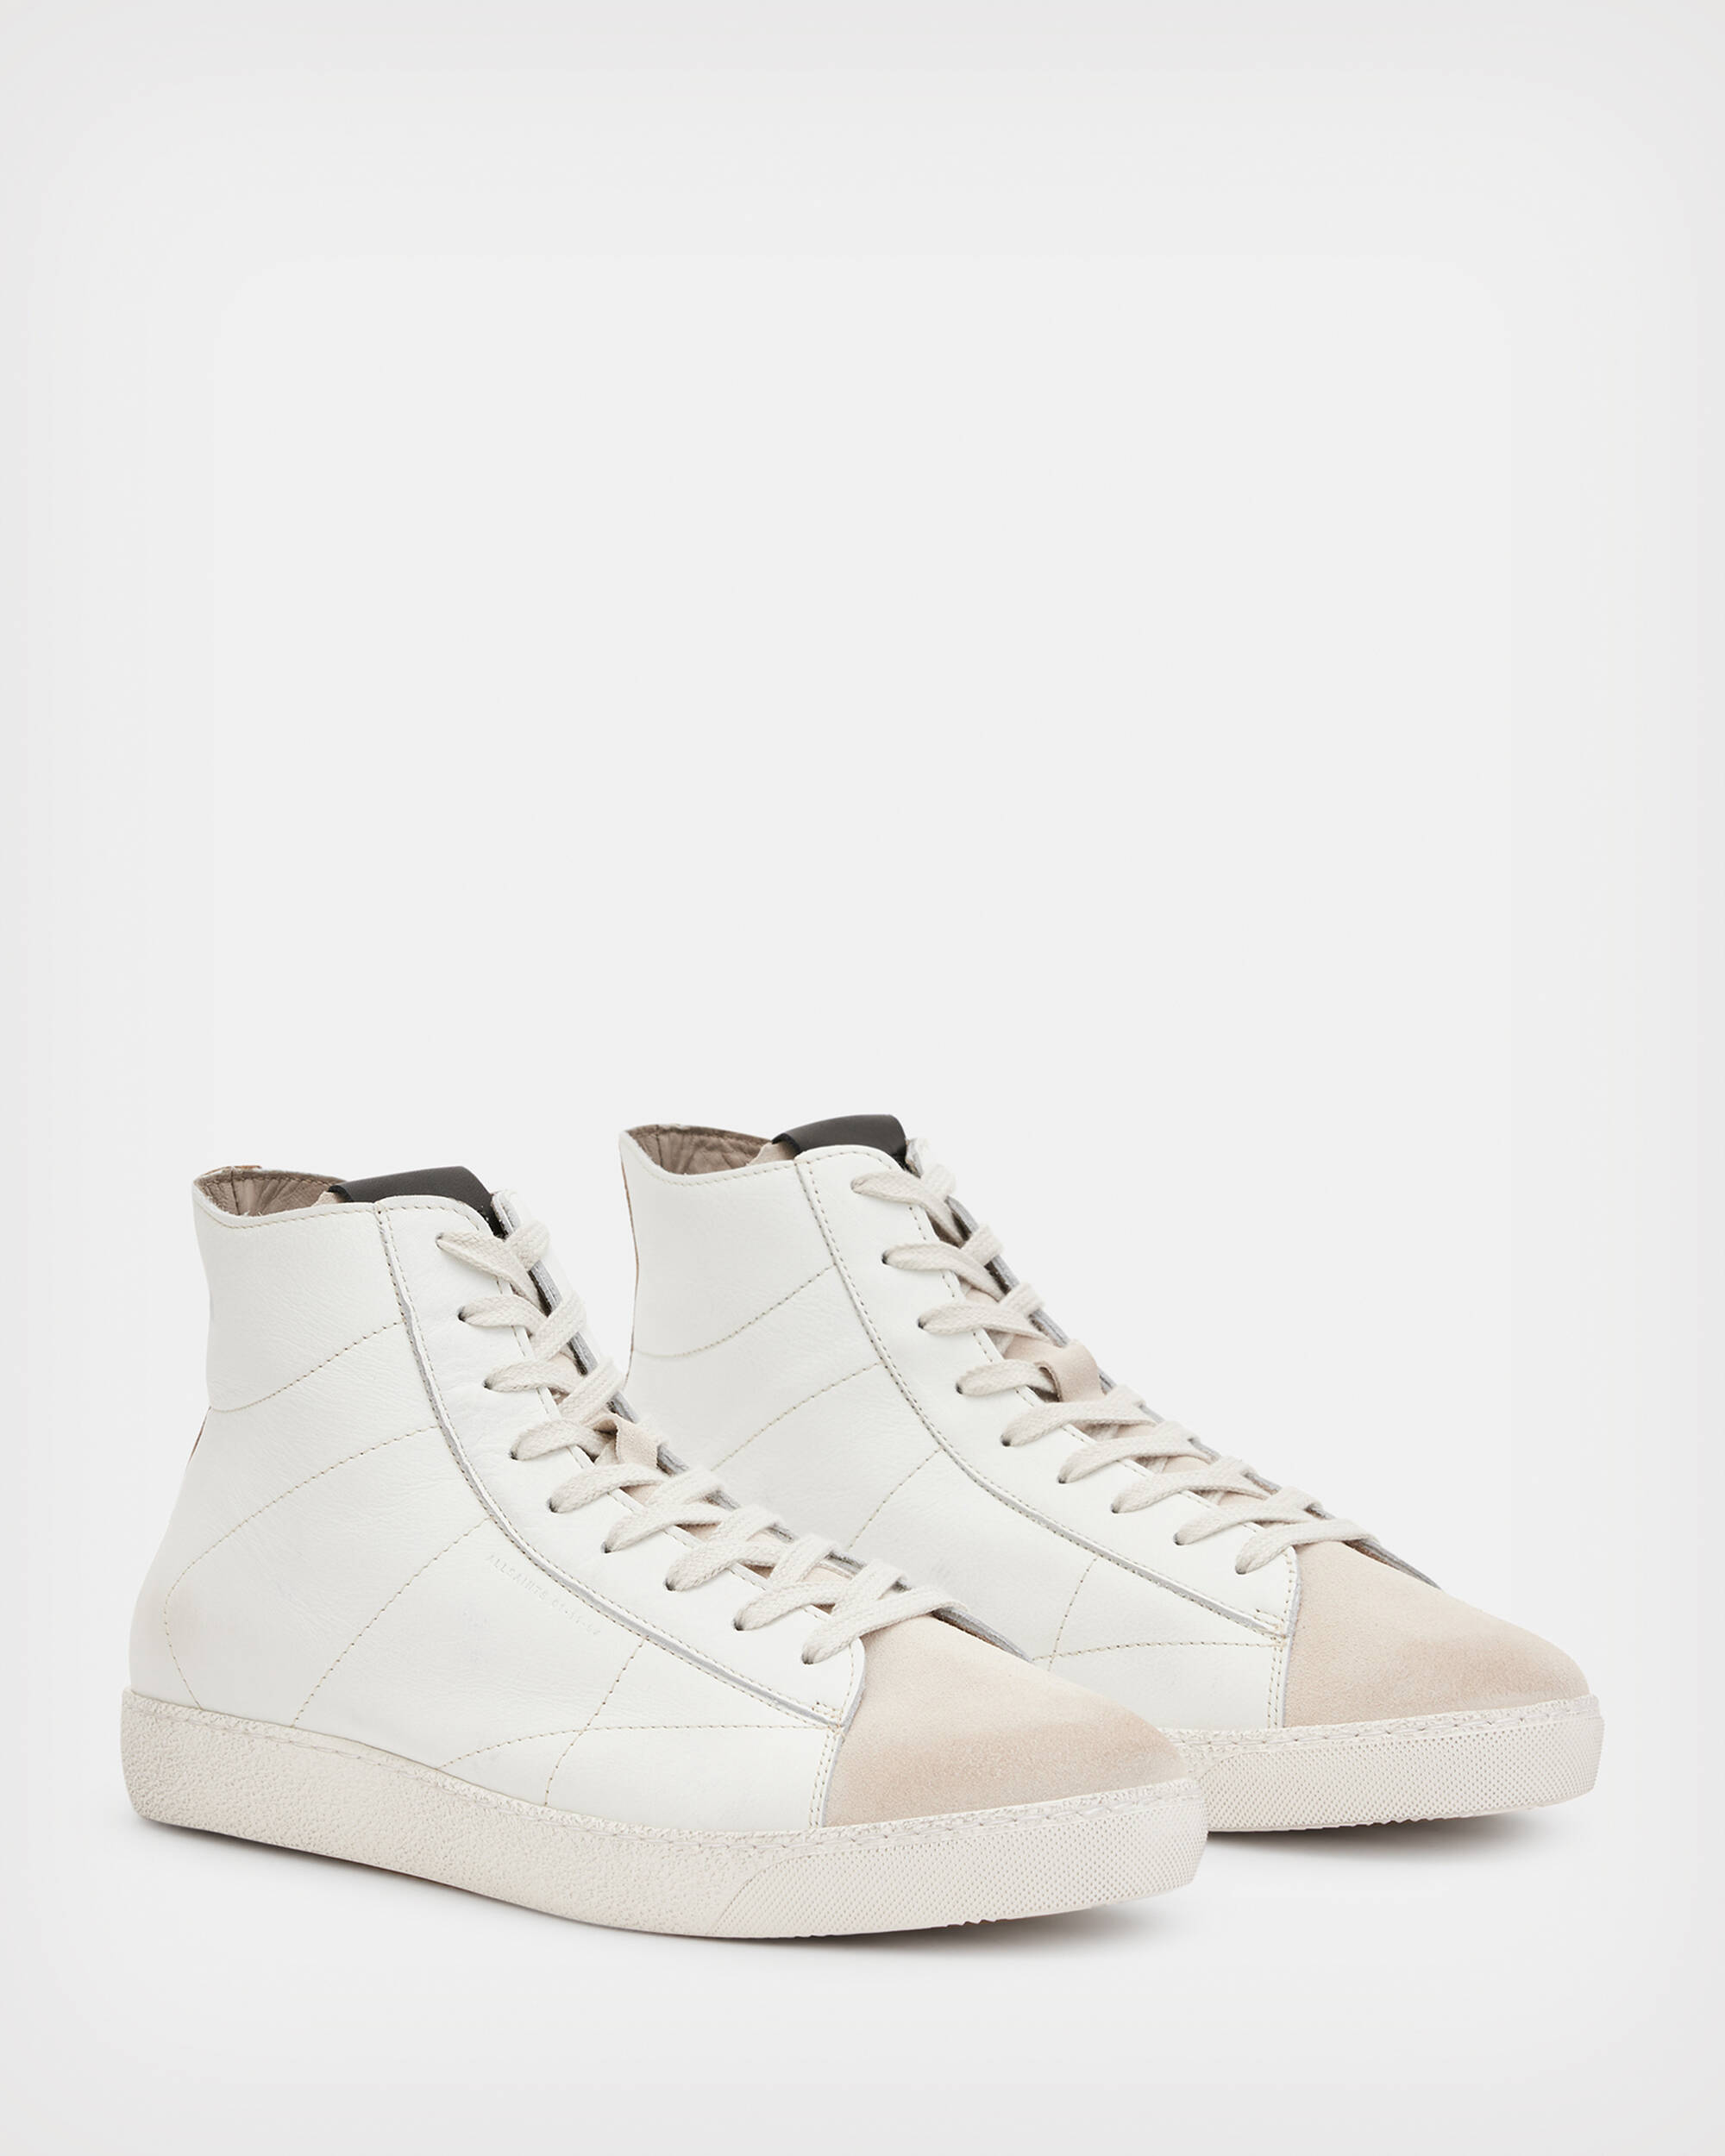 Tundy High Top Sneakers WHITE LEOPARD | ALLSAINTS US